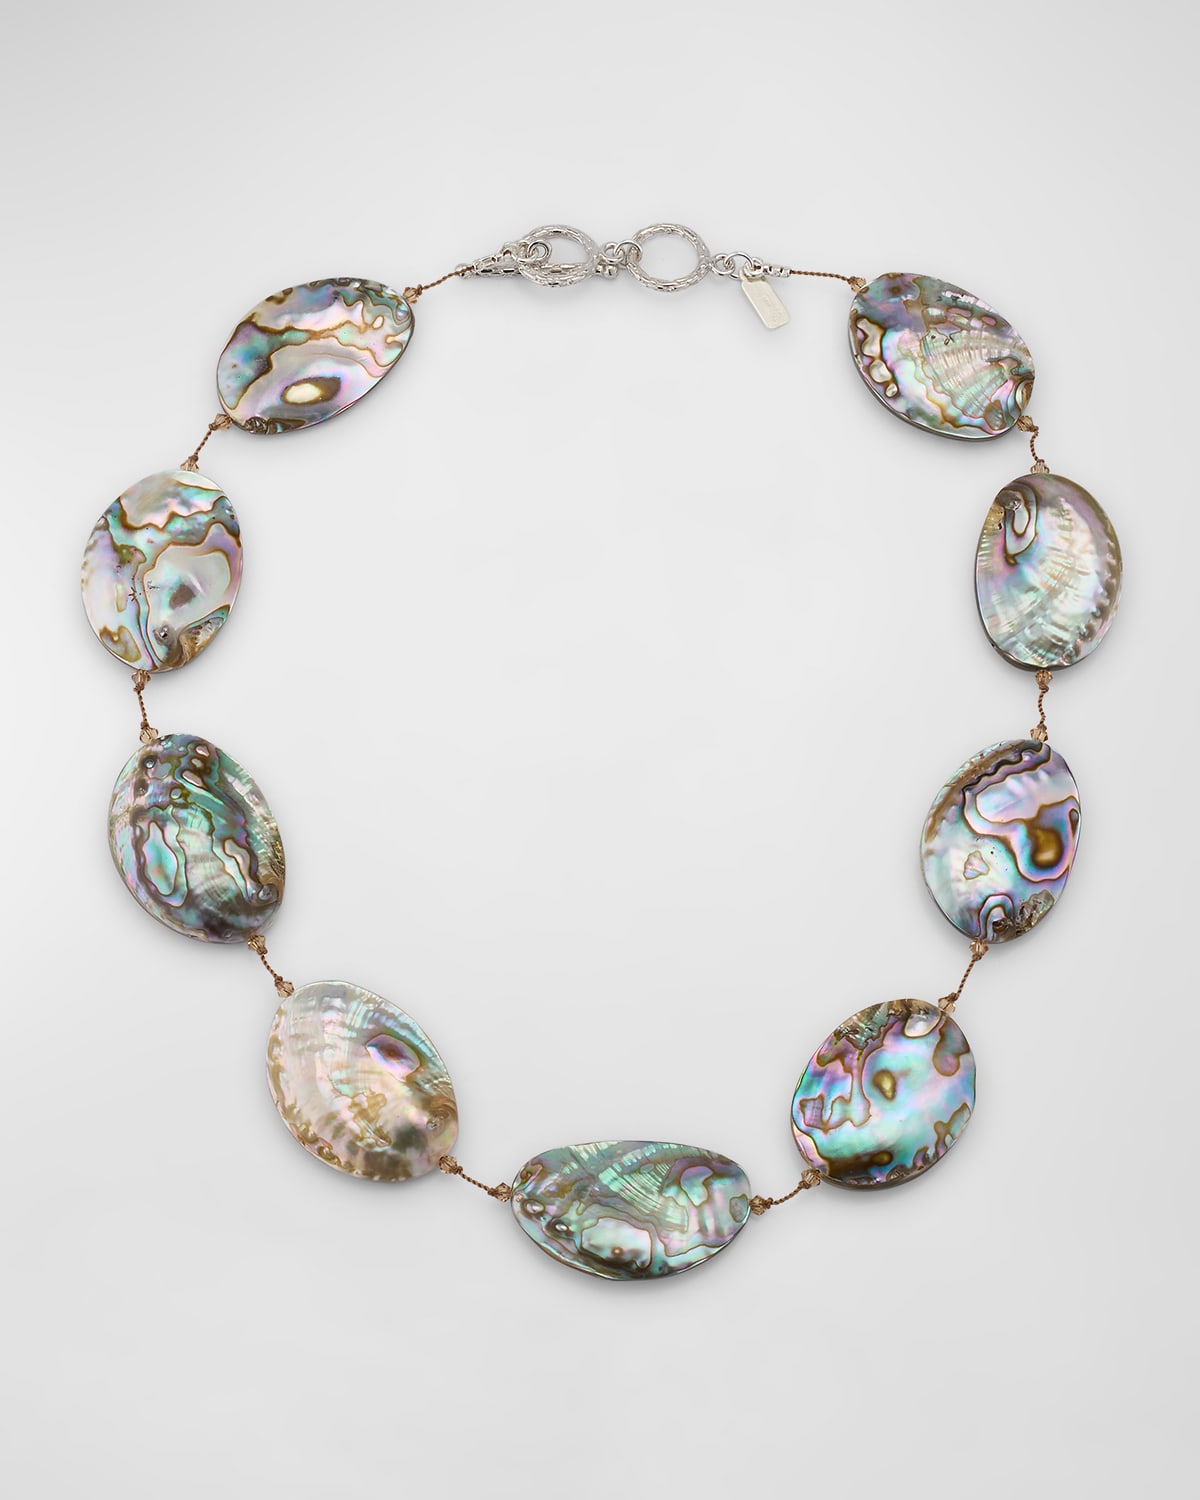 Large Abalone Shell Necklace with Sterling Silver